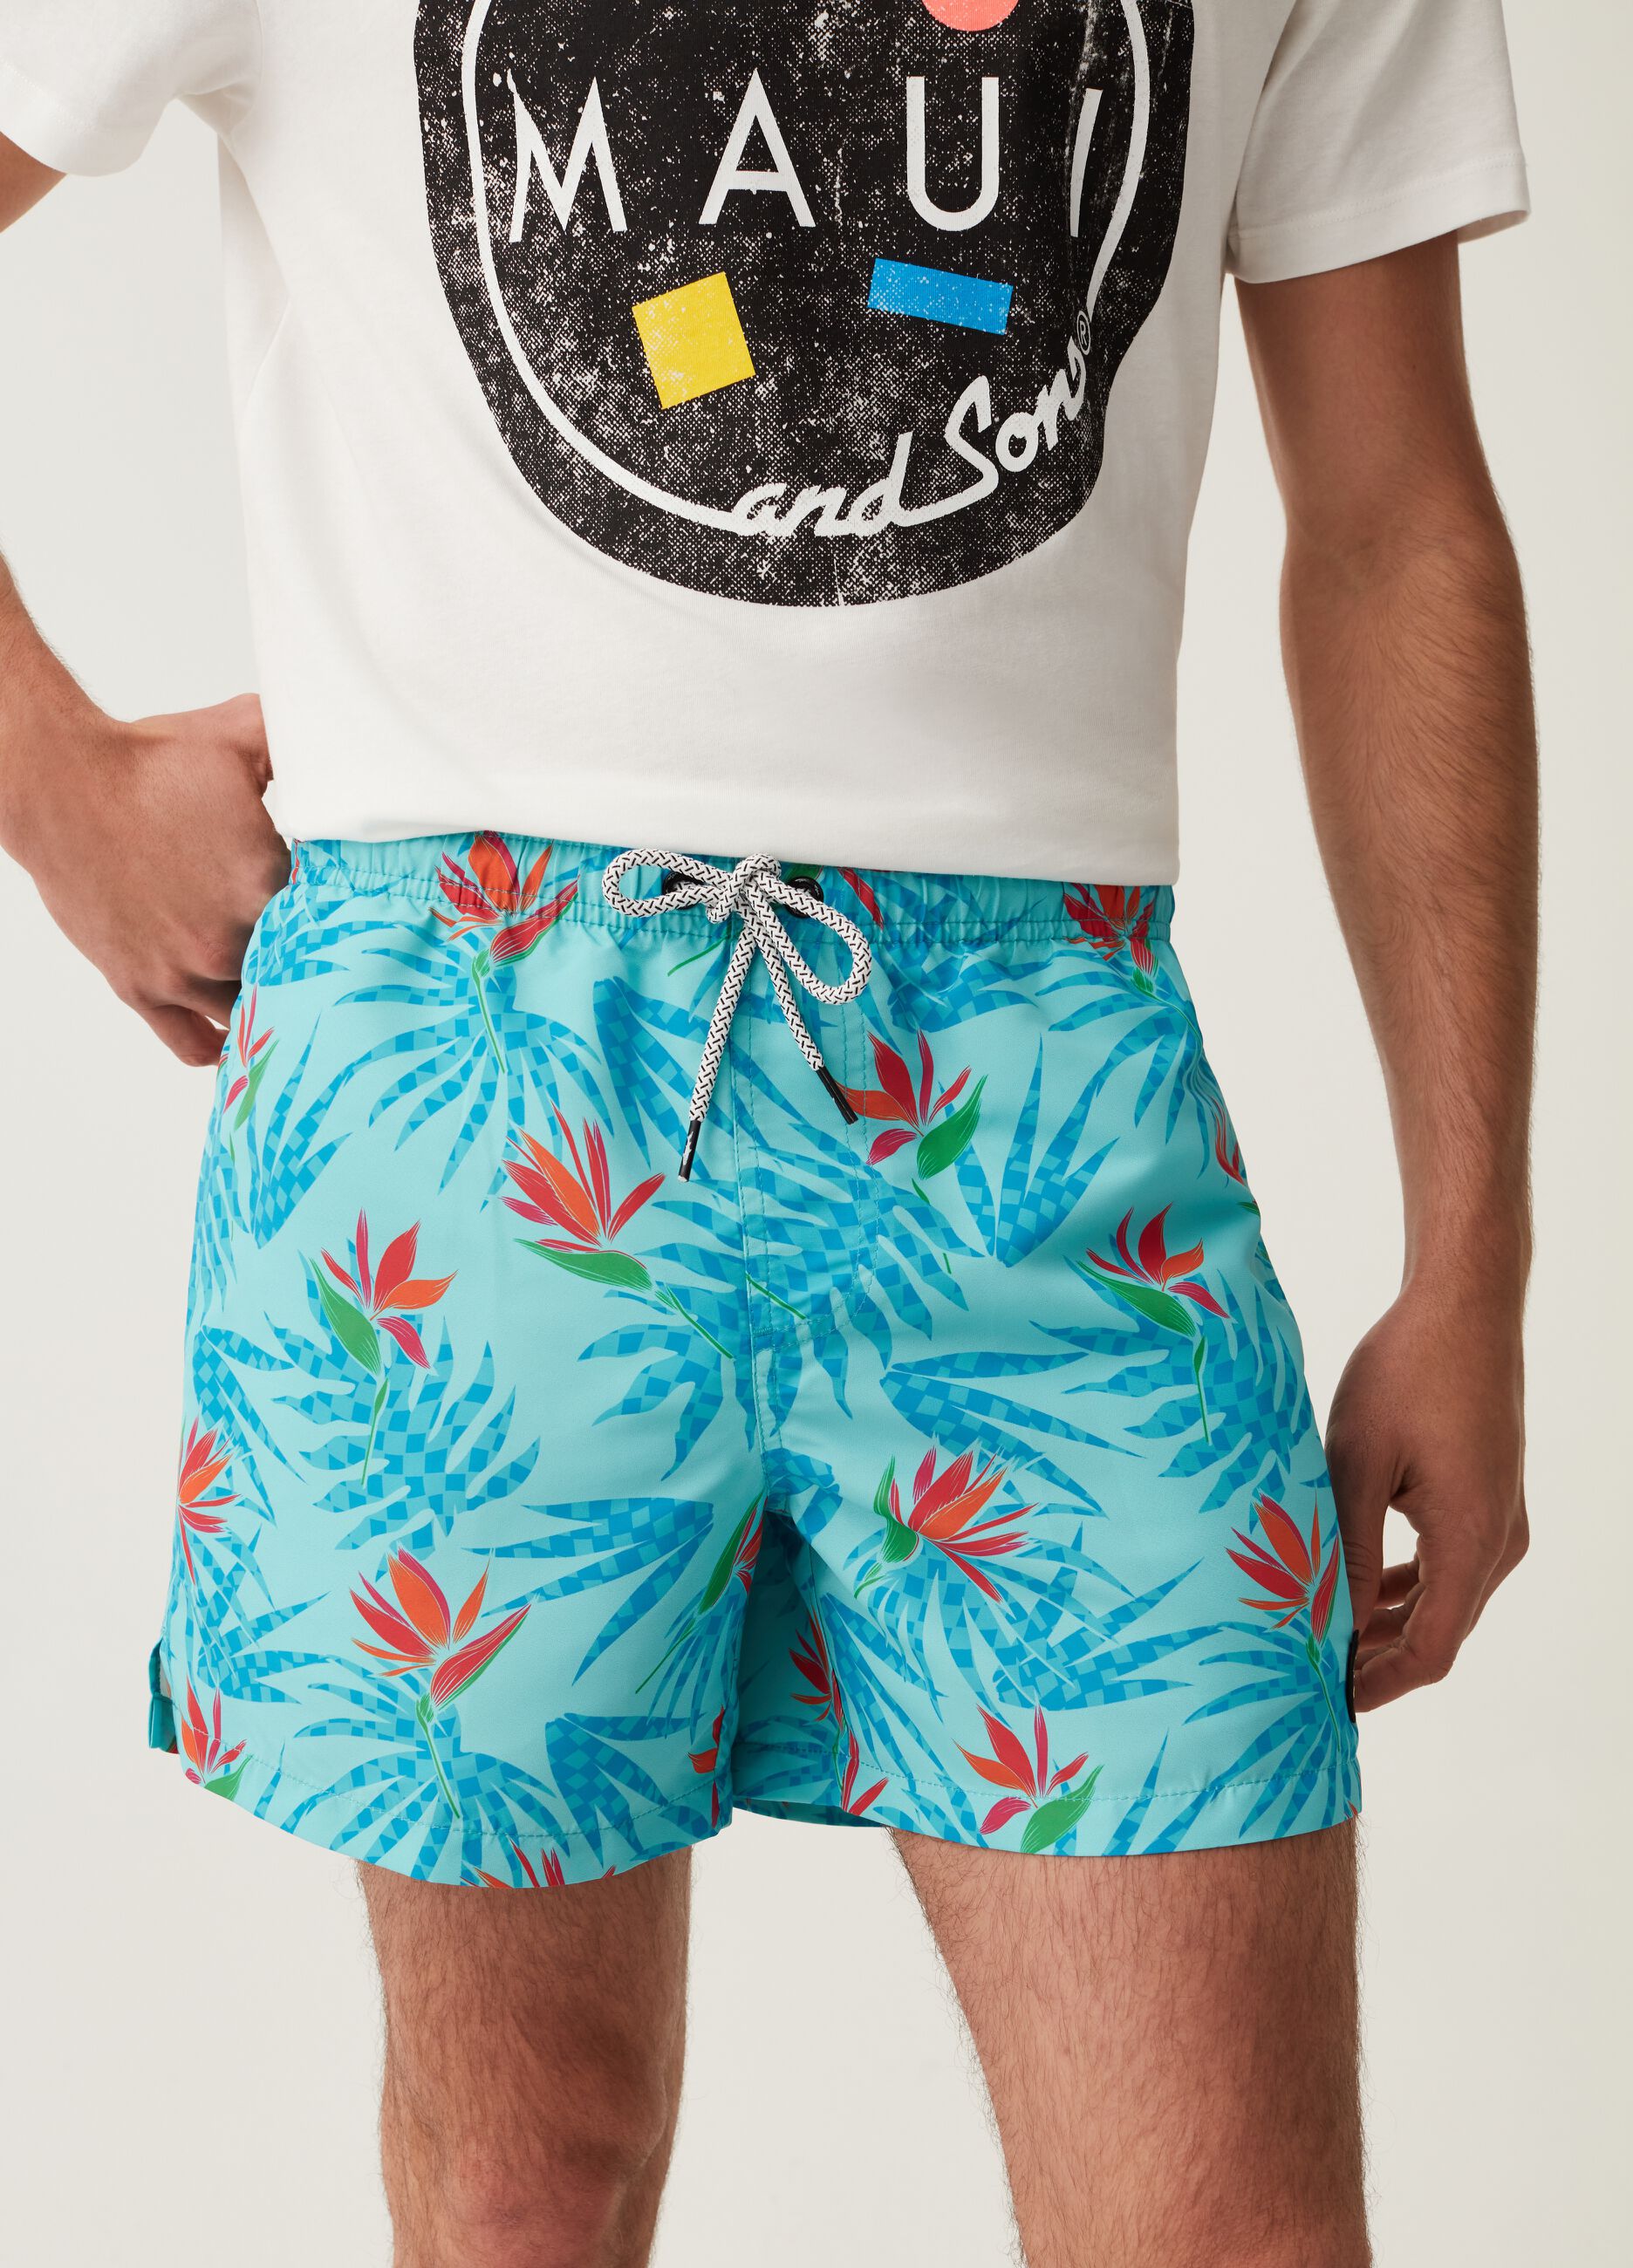 Costume boxer stampa tropicale Maui and Sons_1